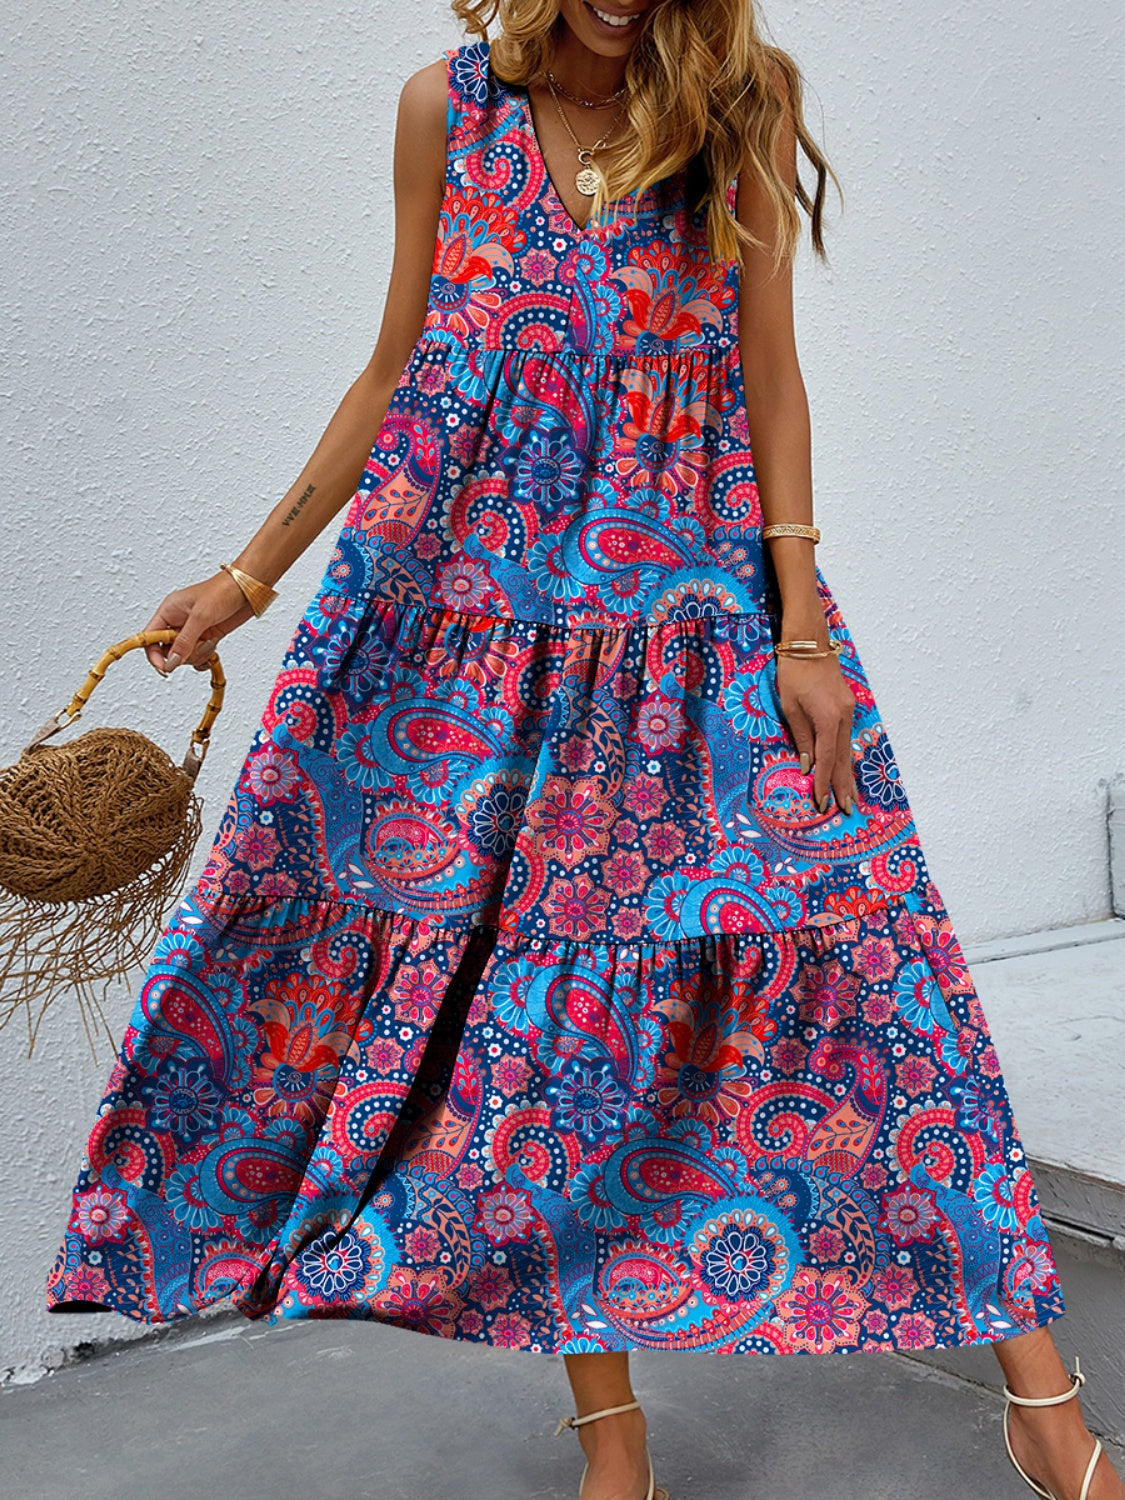 Small Town Roots Tiered Dress